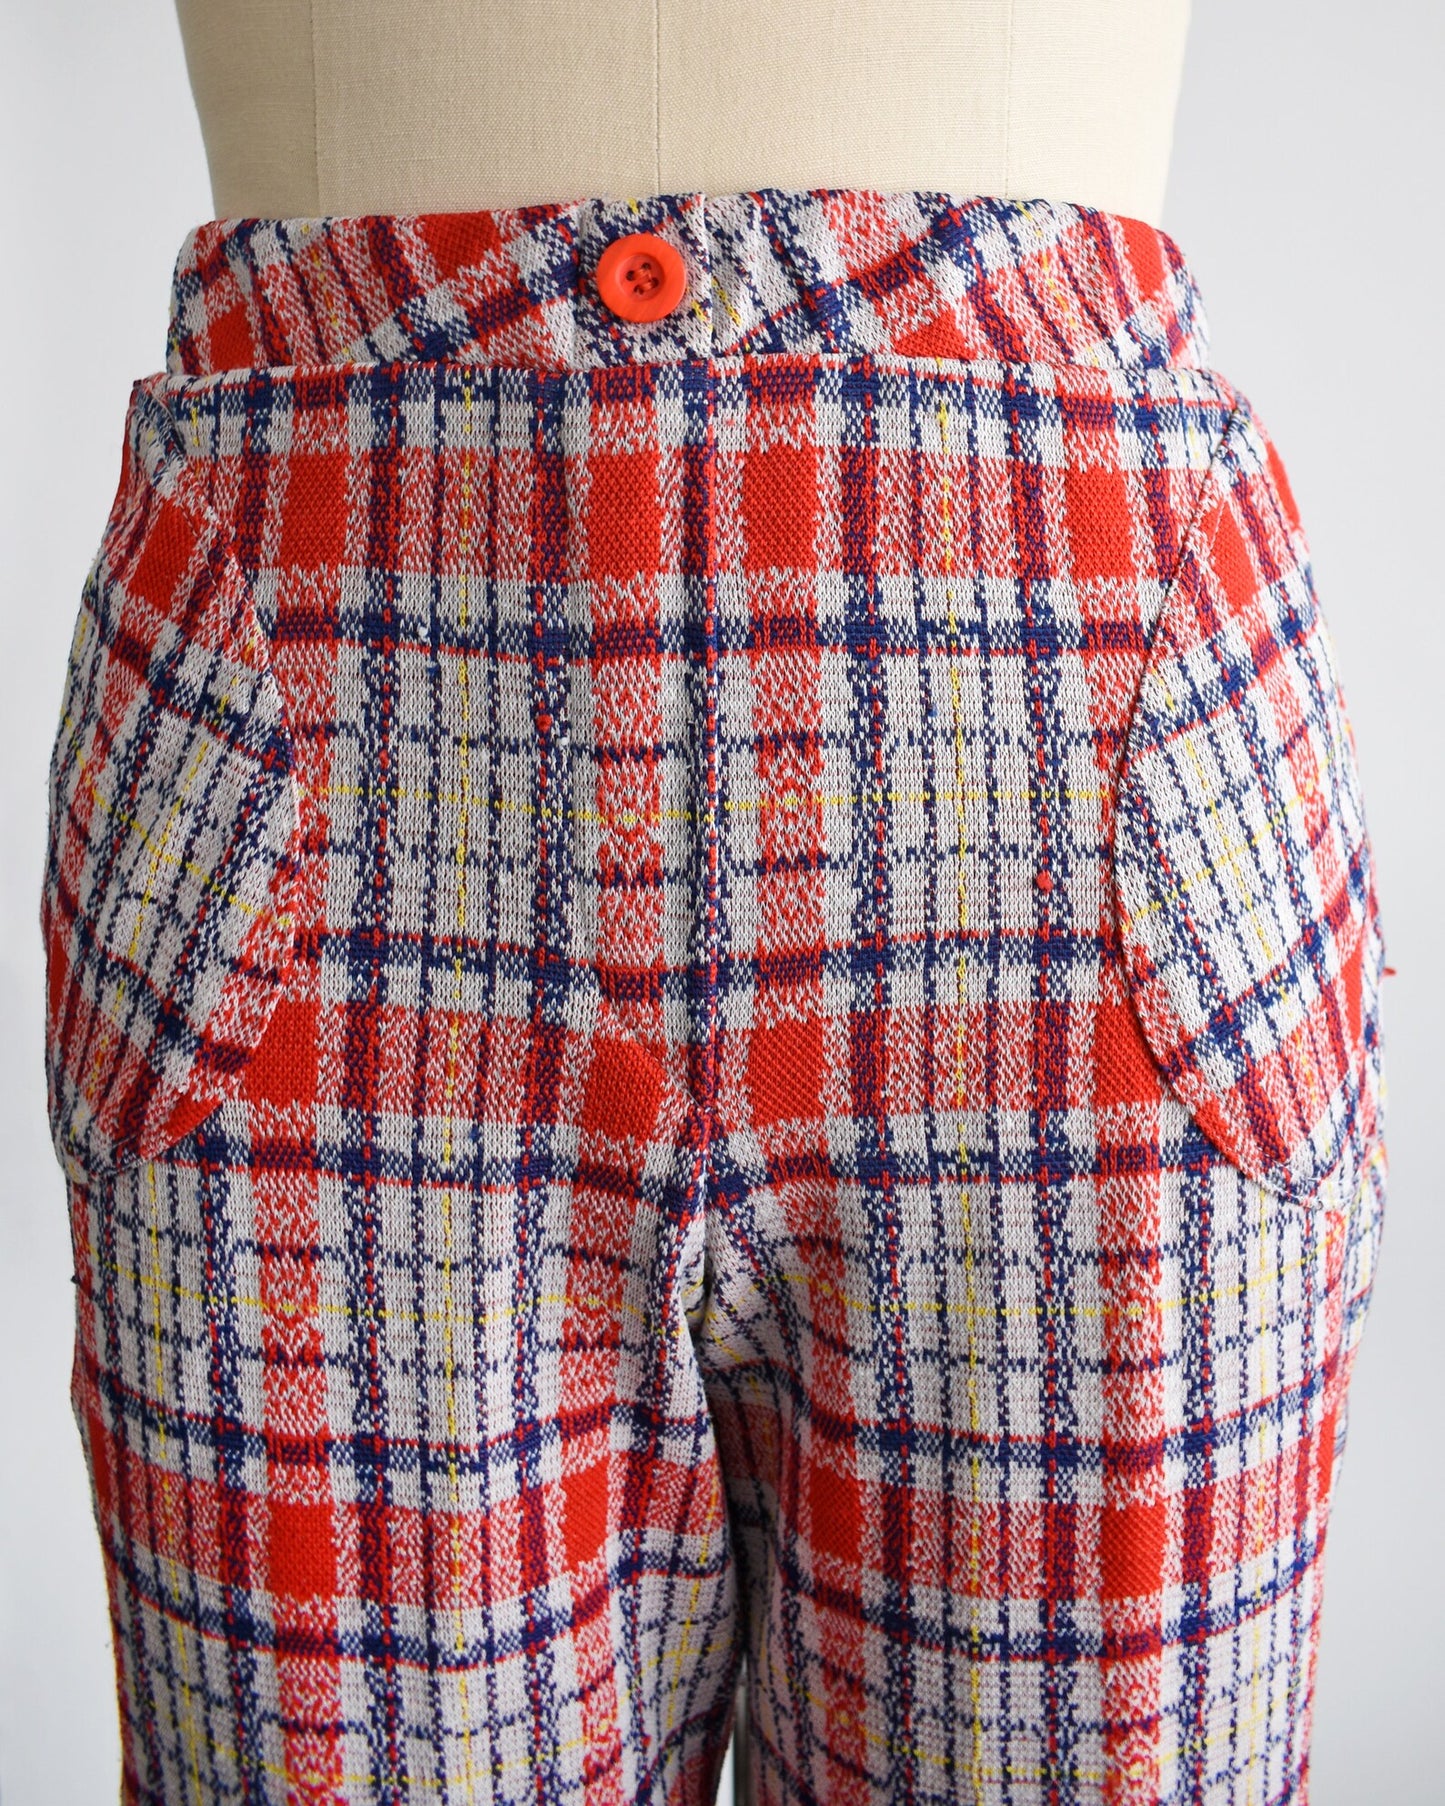 Close up of the upper part of the pants that shows a decorative red button at the center of the waist, the plaid, and the rounded hip pockets.